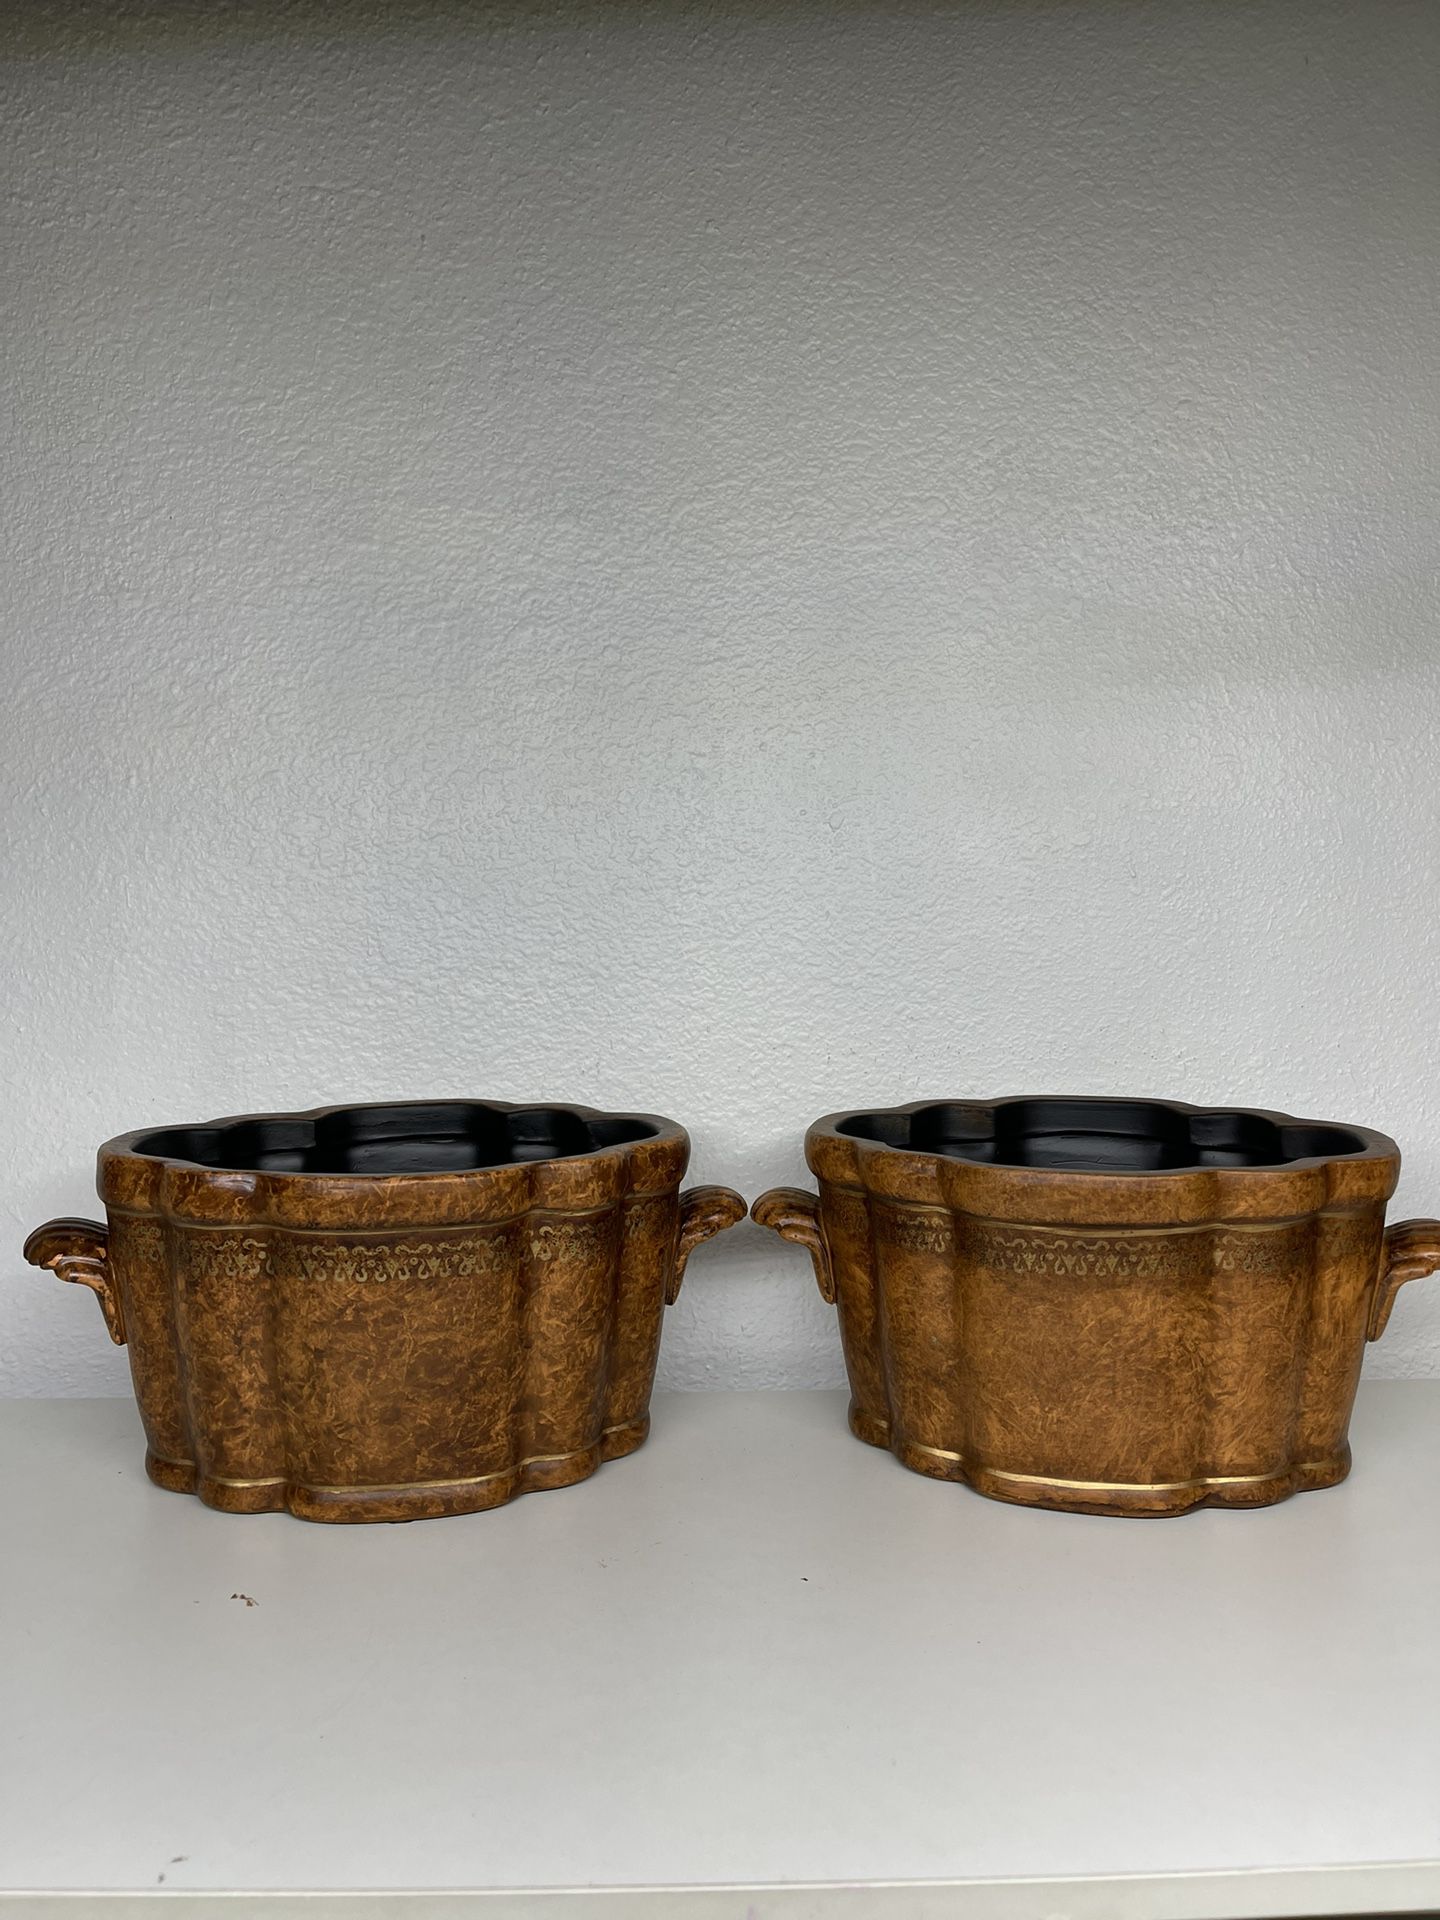 Large Brown Ceramic Pots—Planters with Two Handles ($20 each)